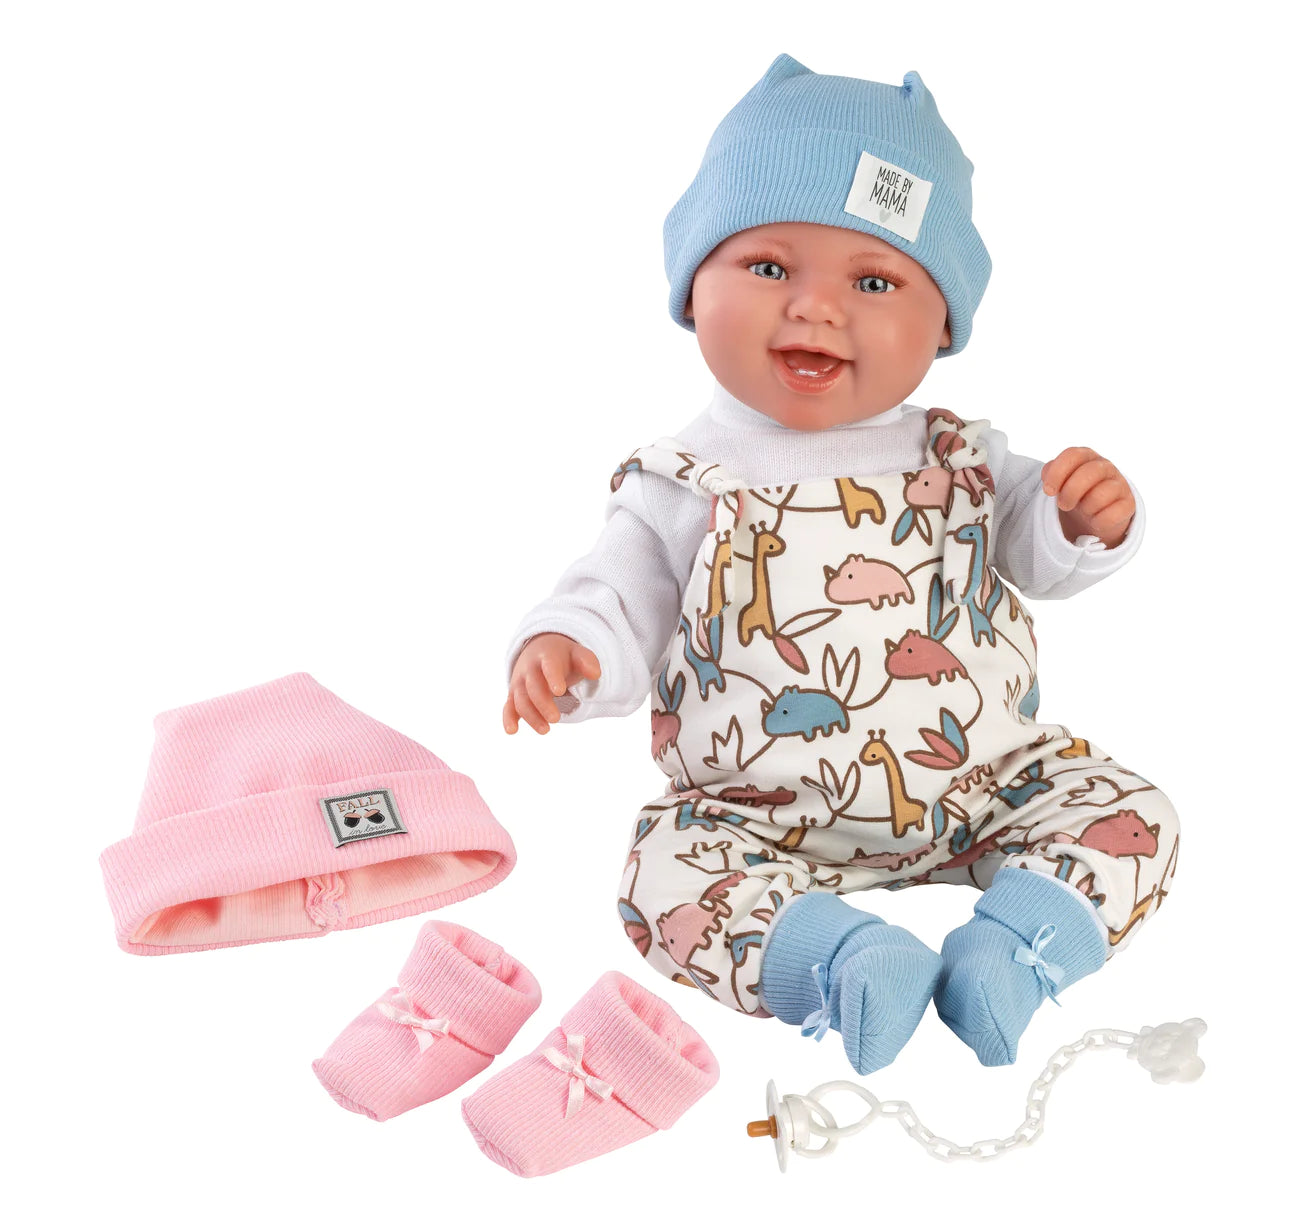 84481 Tala Laughing Doll - Pink or Blue Colour